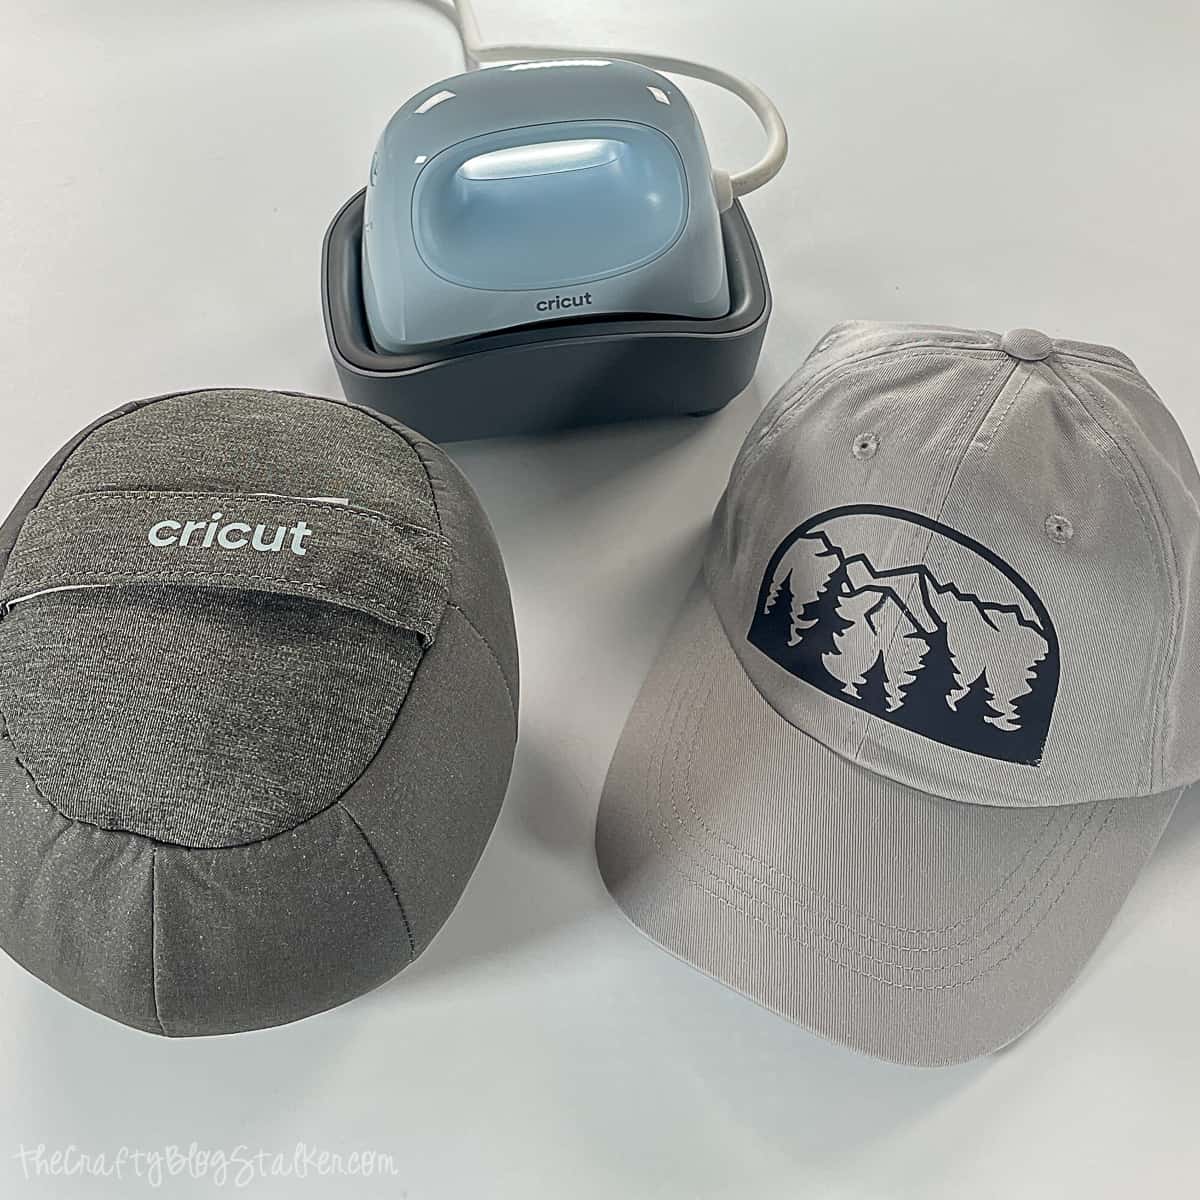 Cricut Hat Press, unboxing, set up, and first projects. 